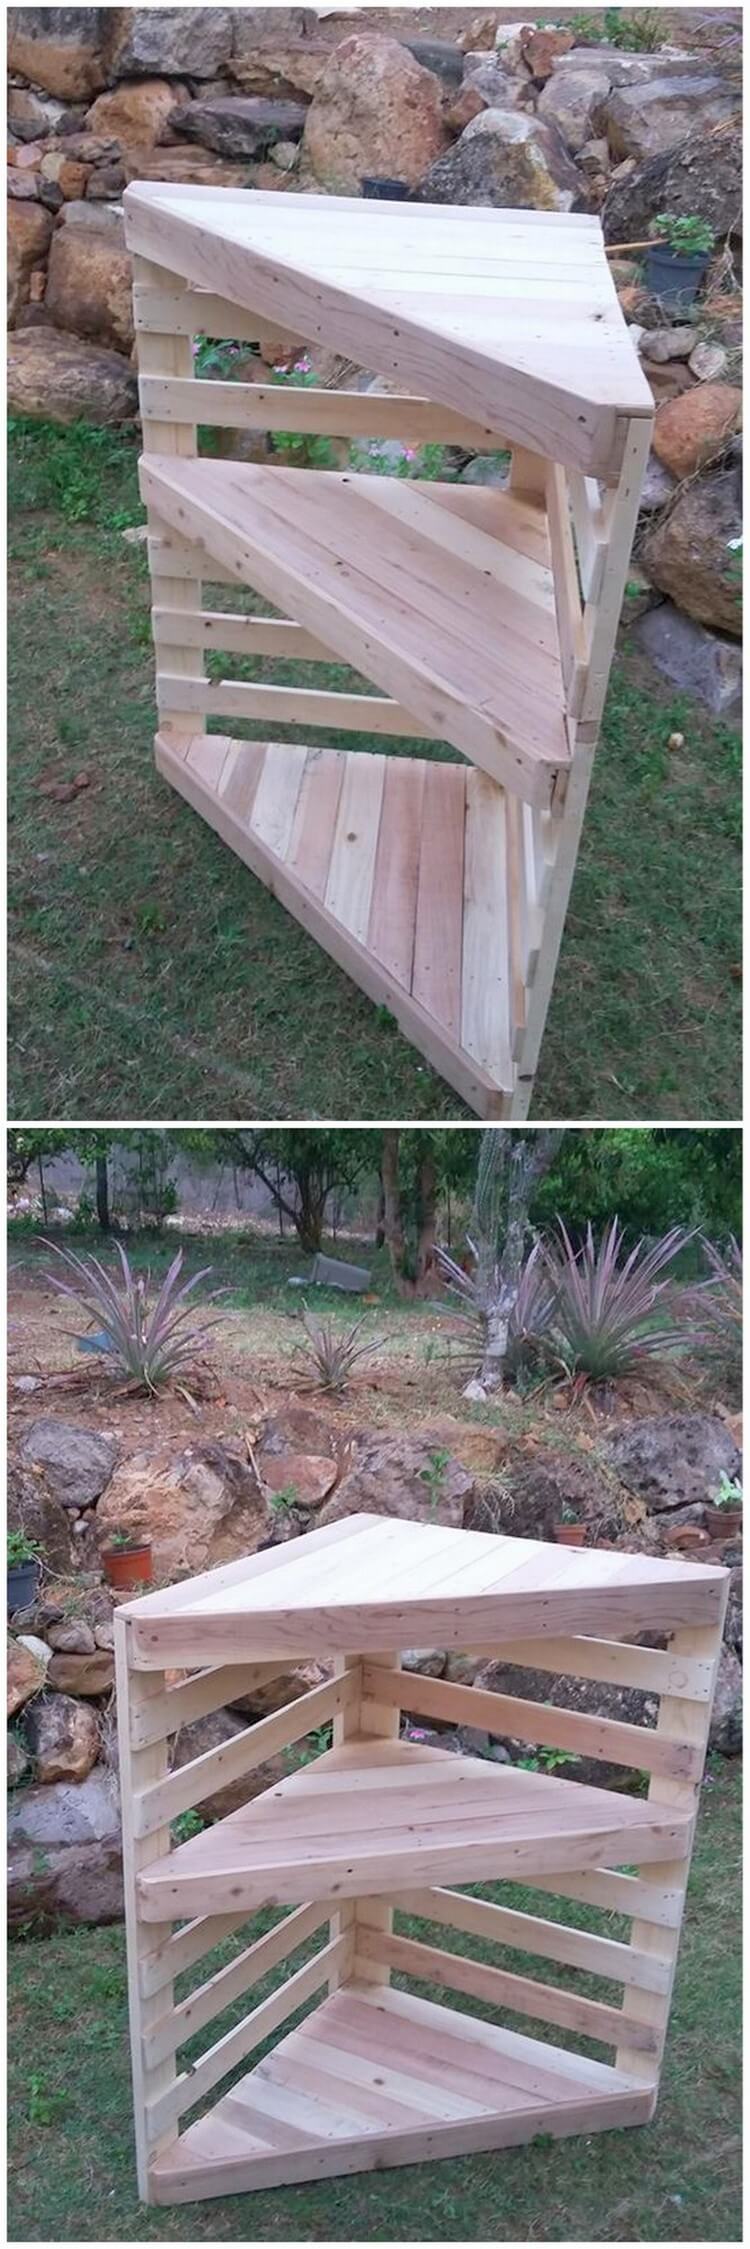 50+ Creative DIY Wood Pallet Ideas for This Summer ...